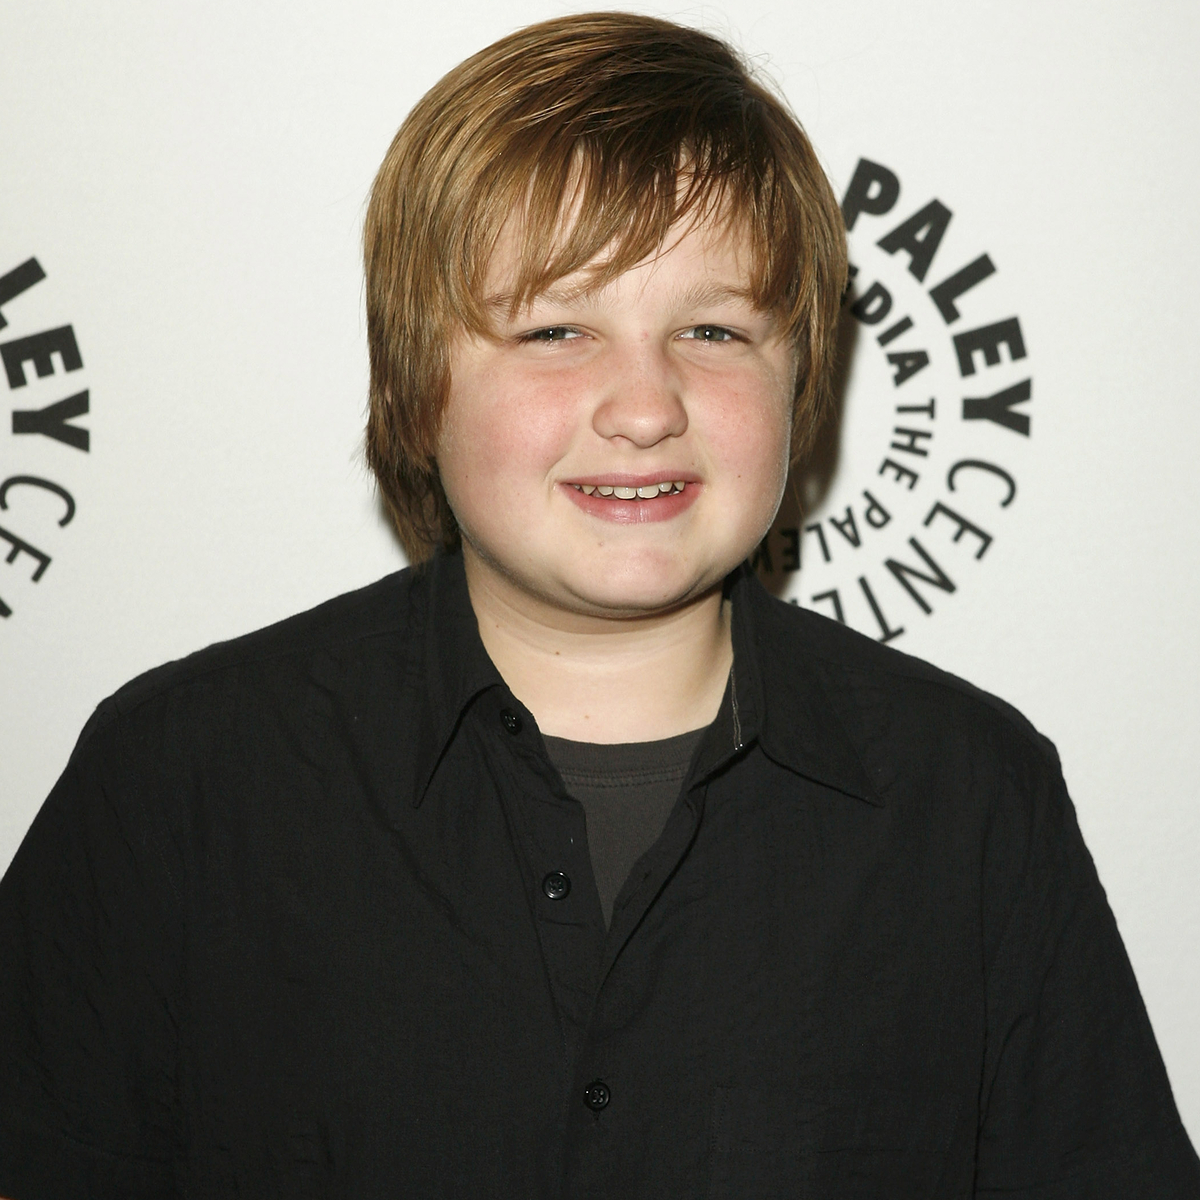 Two and a Half Men Star Angus T. Jones Looks Unrecognizable Now